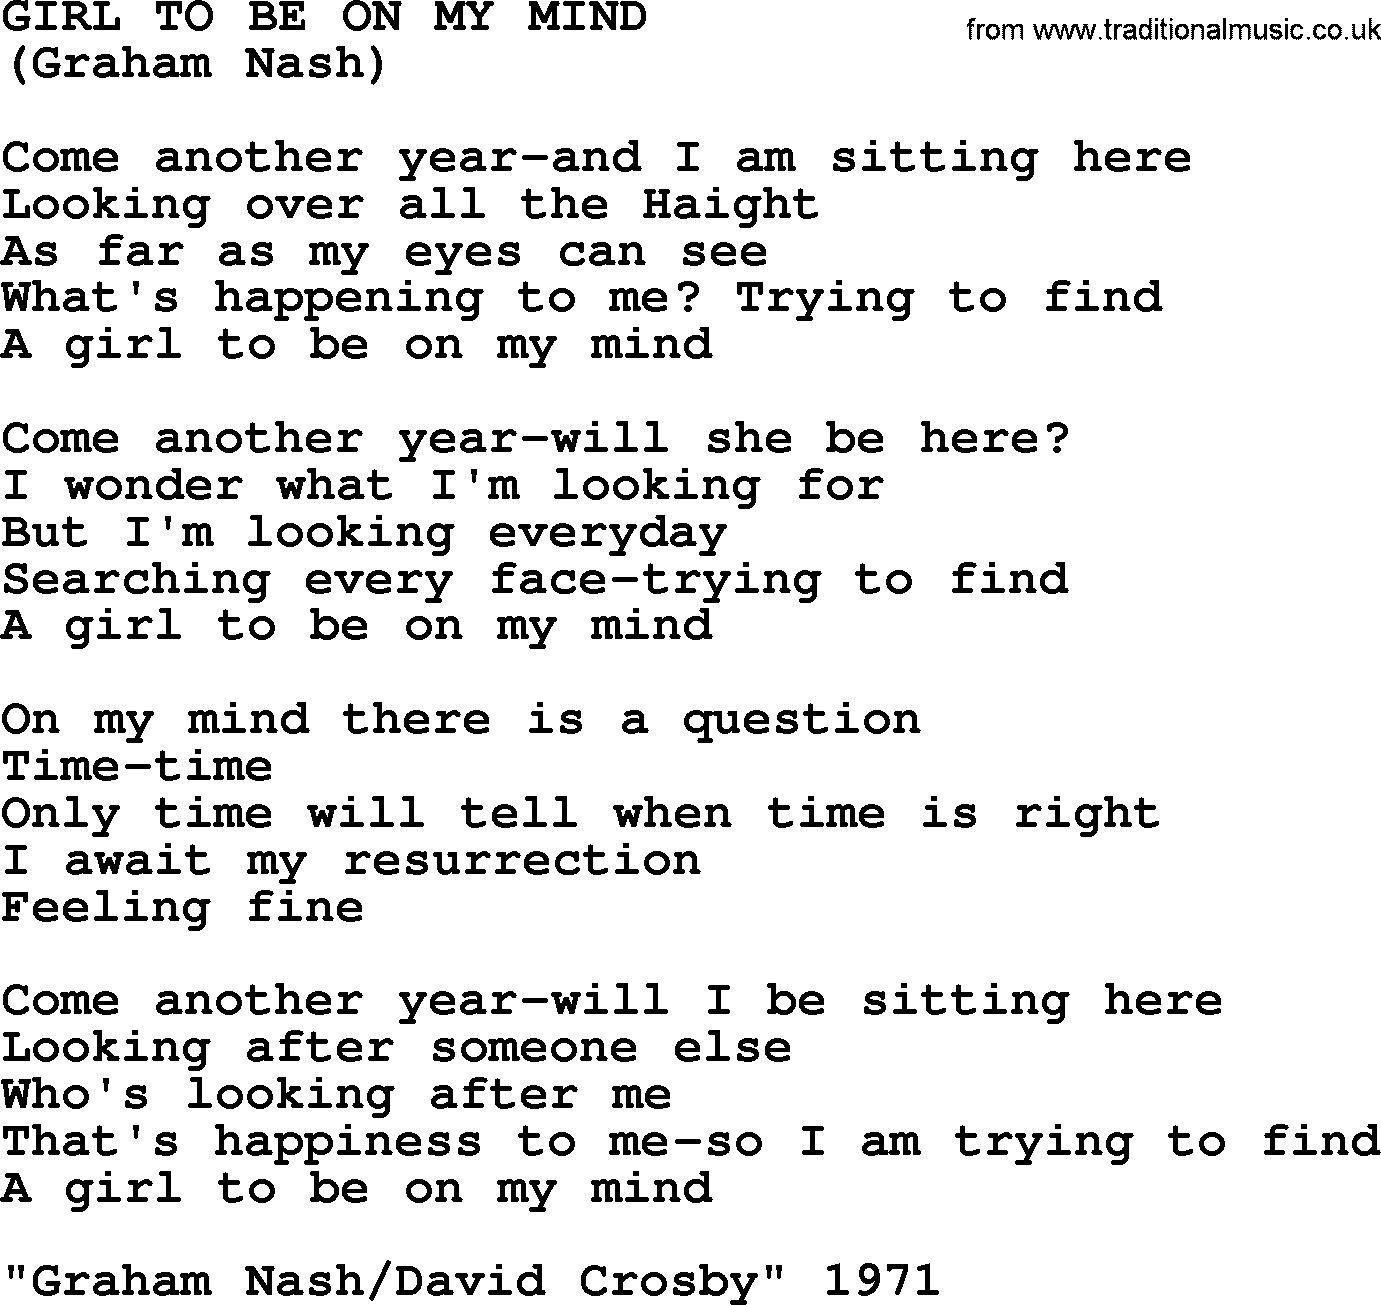 The Byrds song Girl To Be On My Mind, lyrics